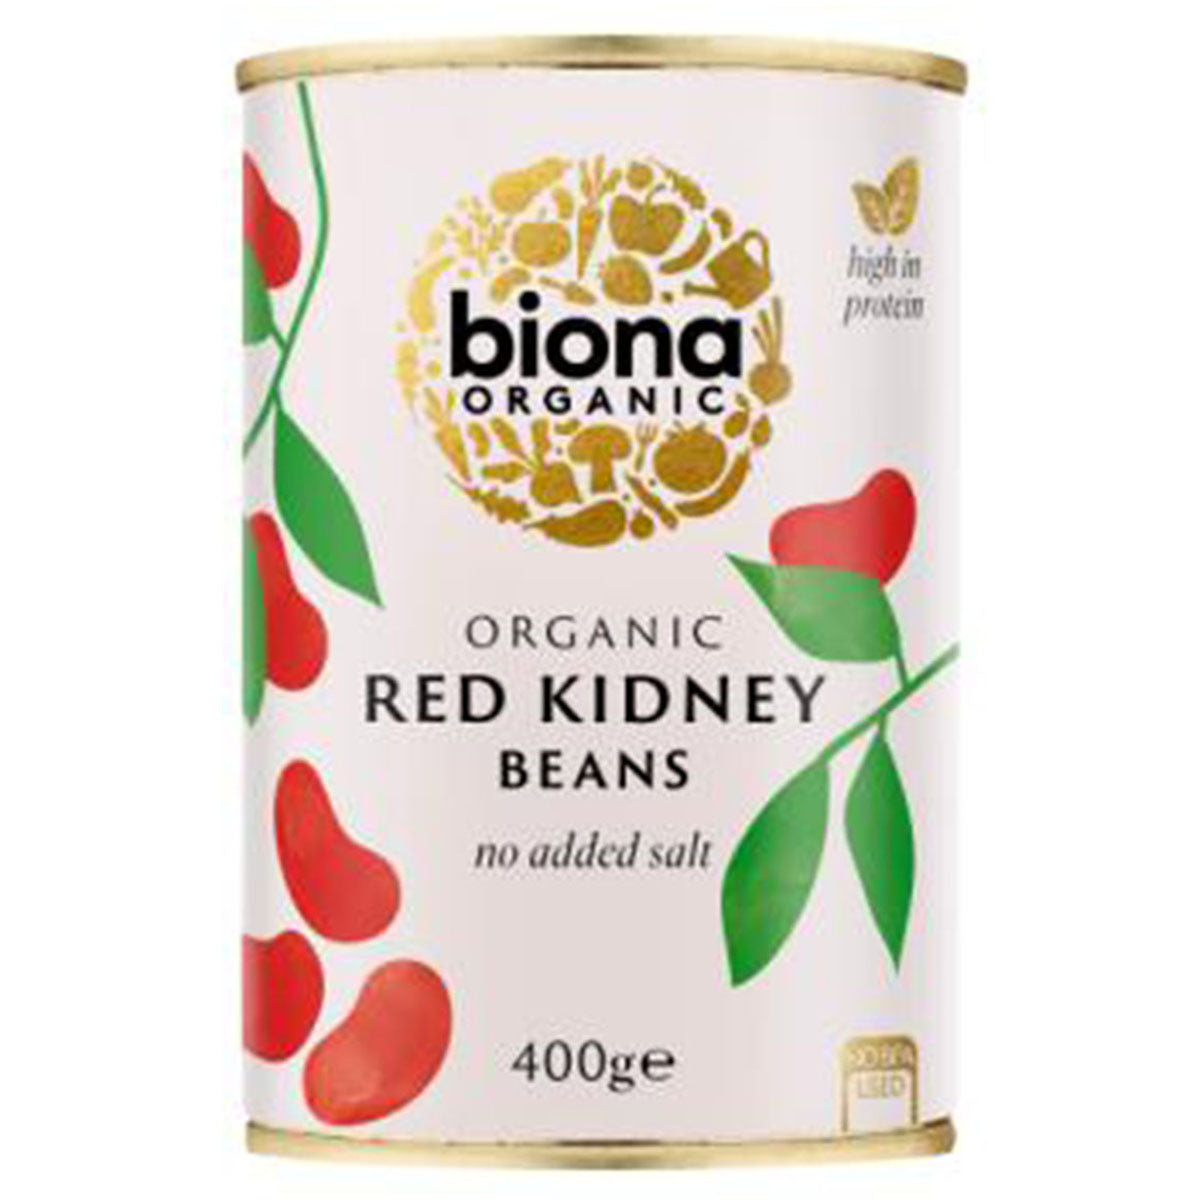 Biona Organic - Red Kidney Beans - 400g - Continental Food Store